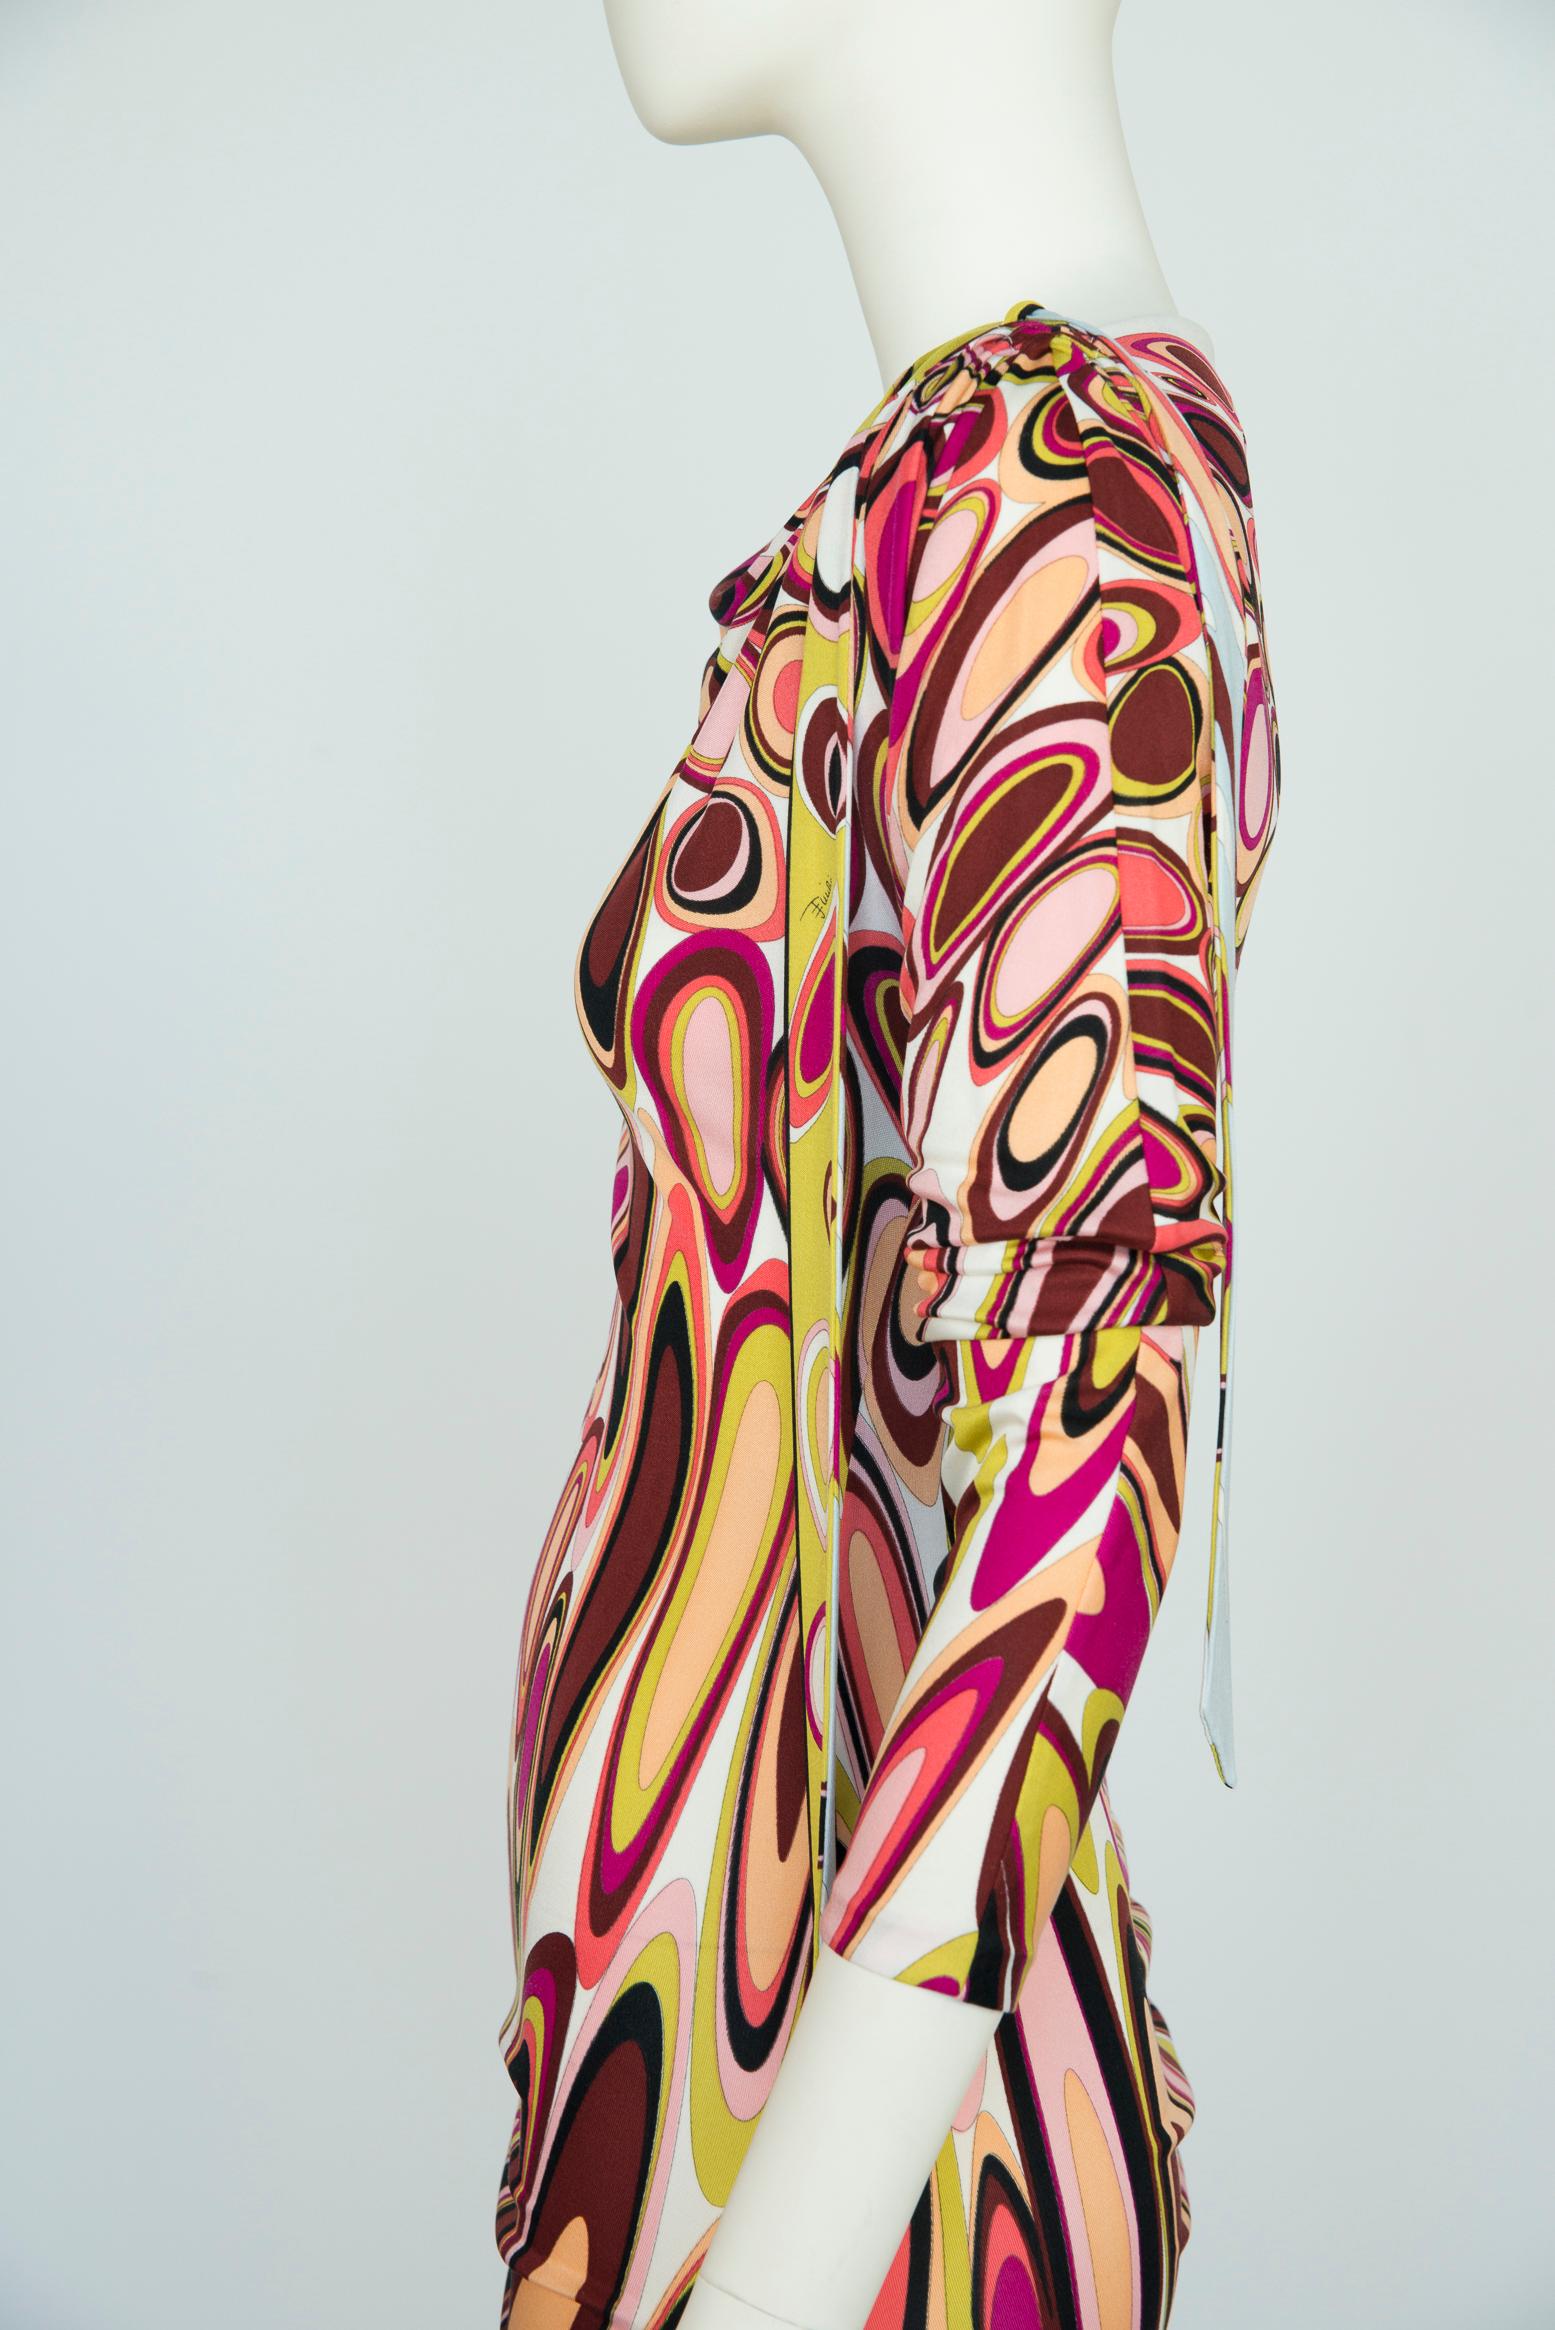 Emilio Pucci By Christian Lacroix Printed Stretch-Jersey Dress, Fall-Winter 2003 For Sale 6